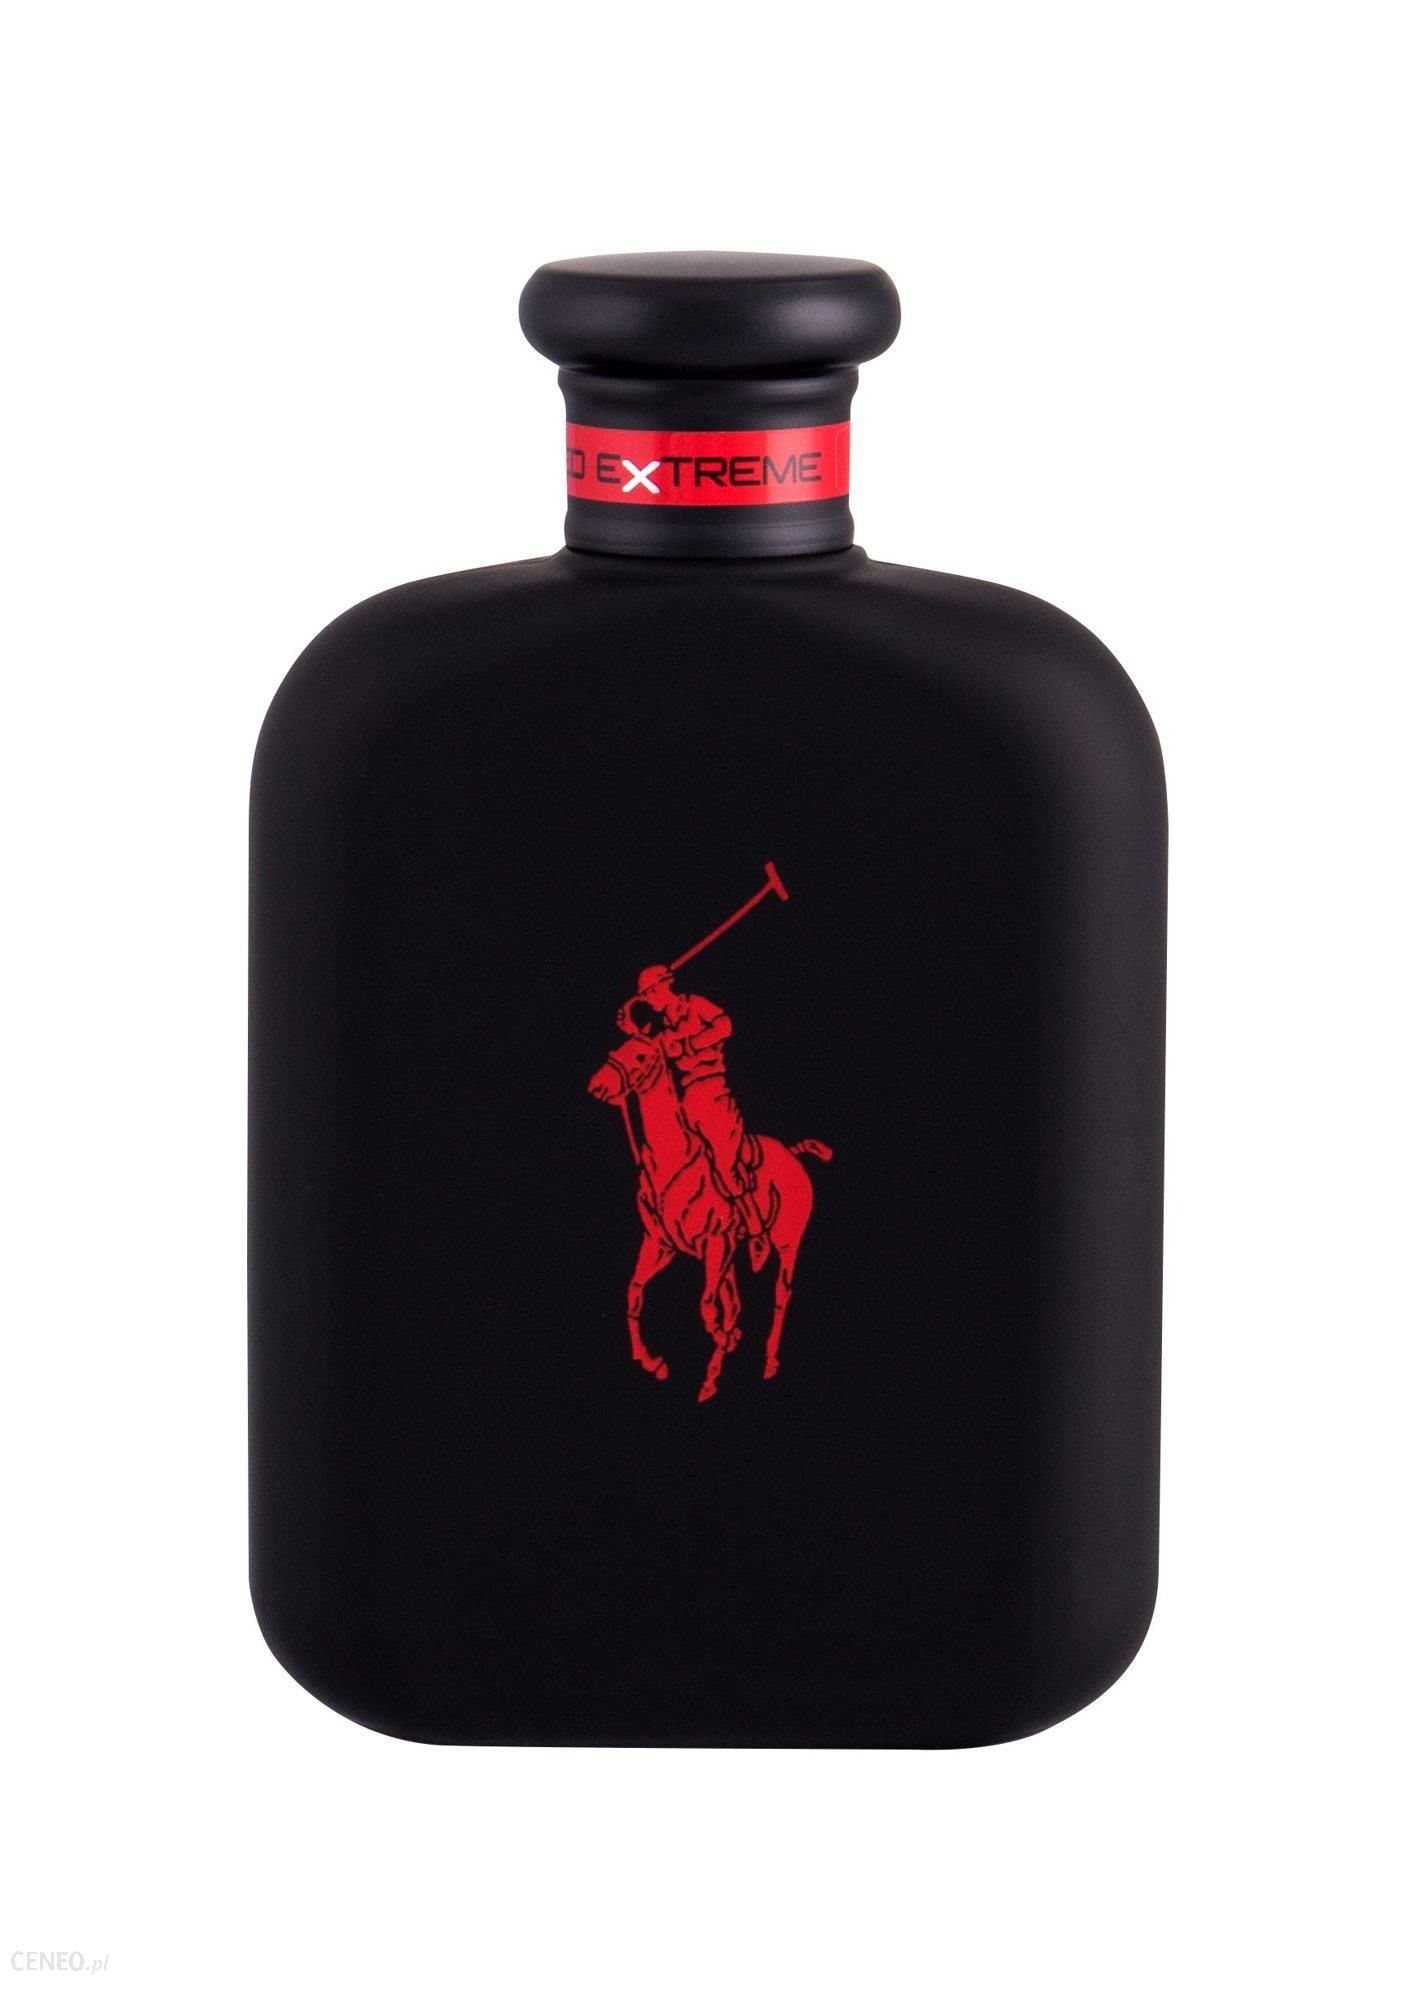 Ralph Lauren Polo Red Extreme 125ml Perfumy